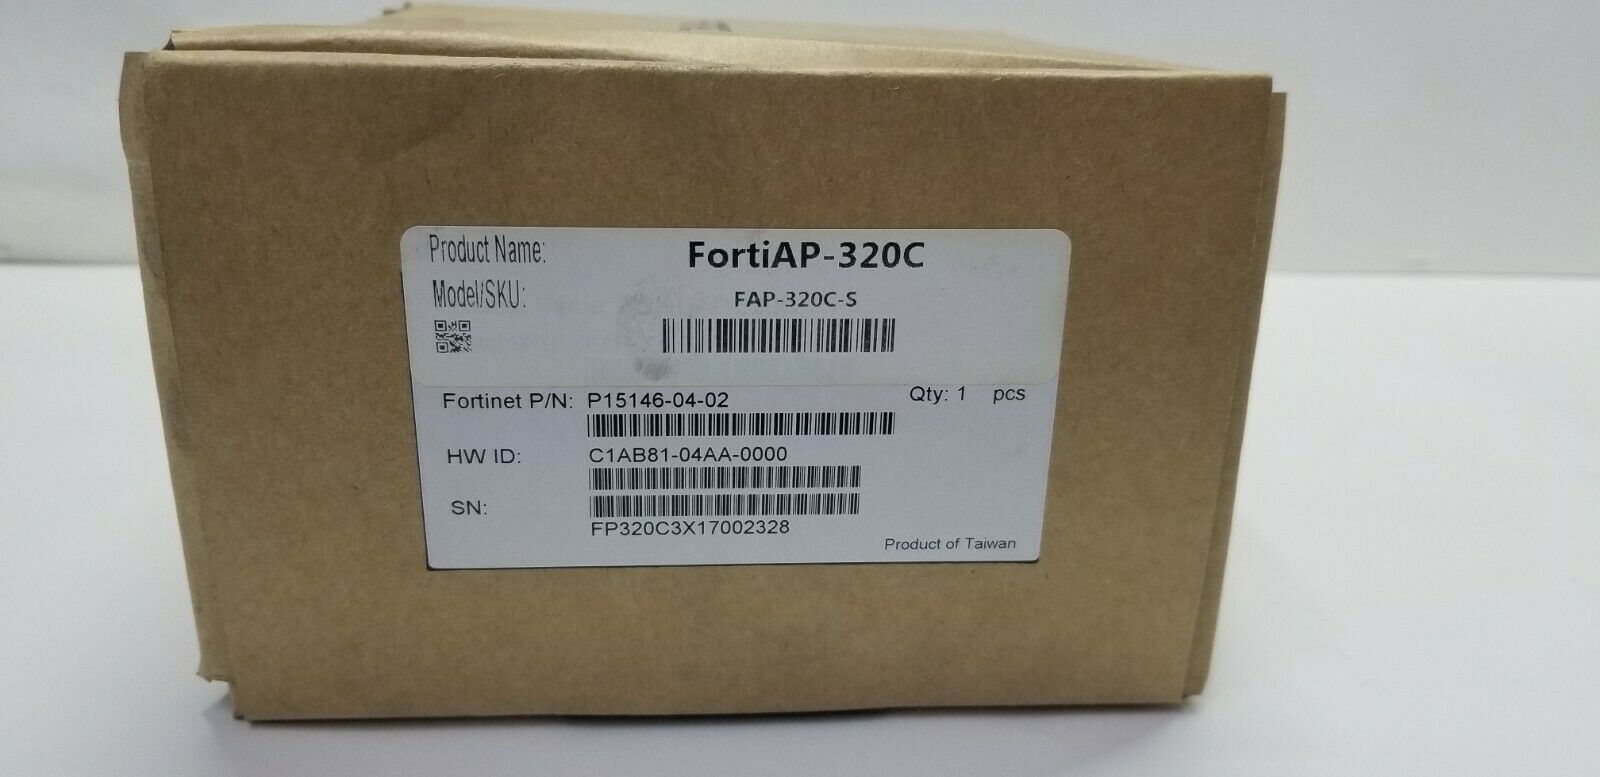 Fortinet FAP-320C FAP-320C-S FORTIAP-320C Wireless Access Point ...